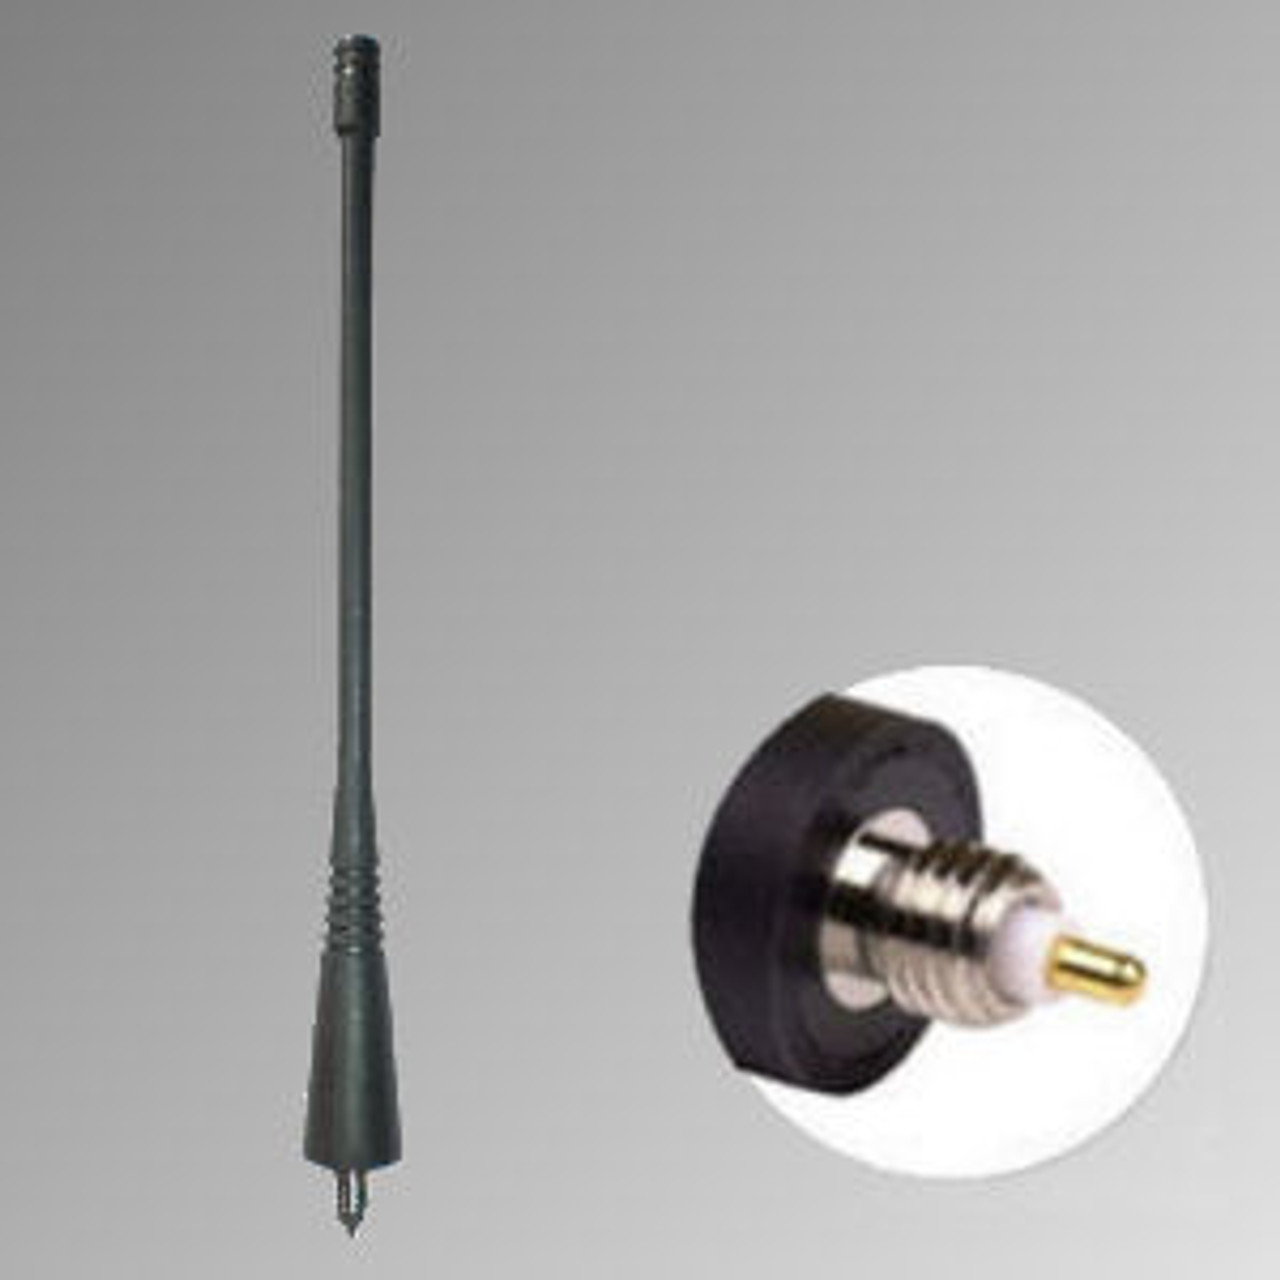 Replacement For Harris KRE1011223/12 Antenna - 6", UHF, 380-520 MHz